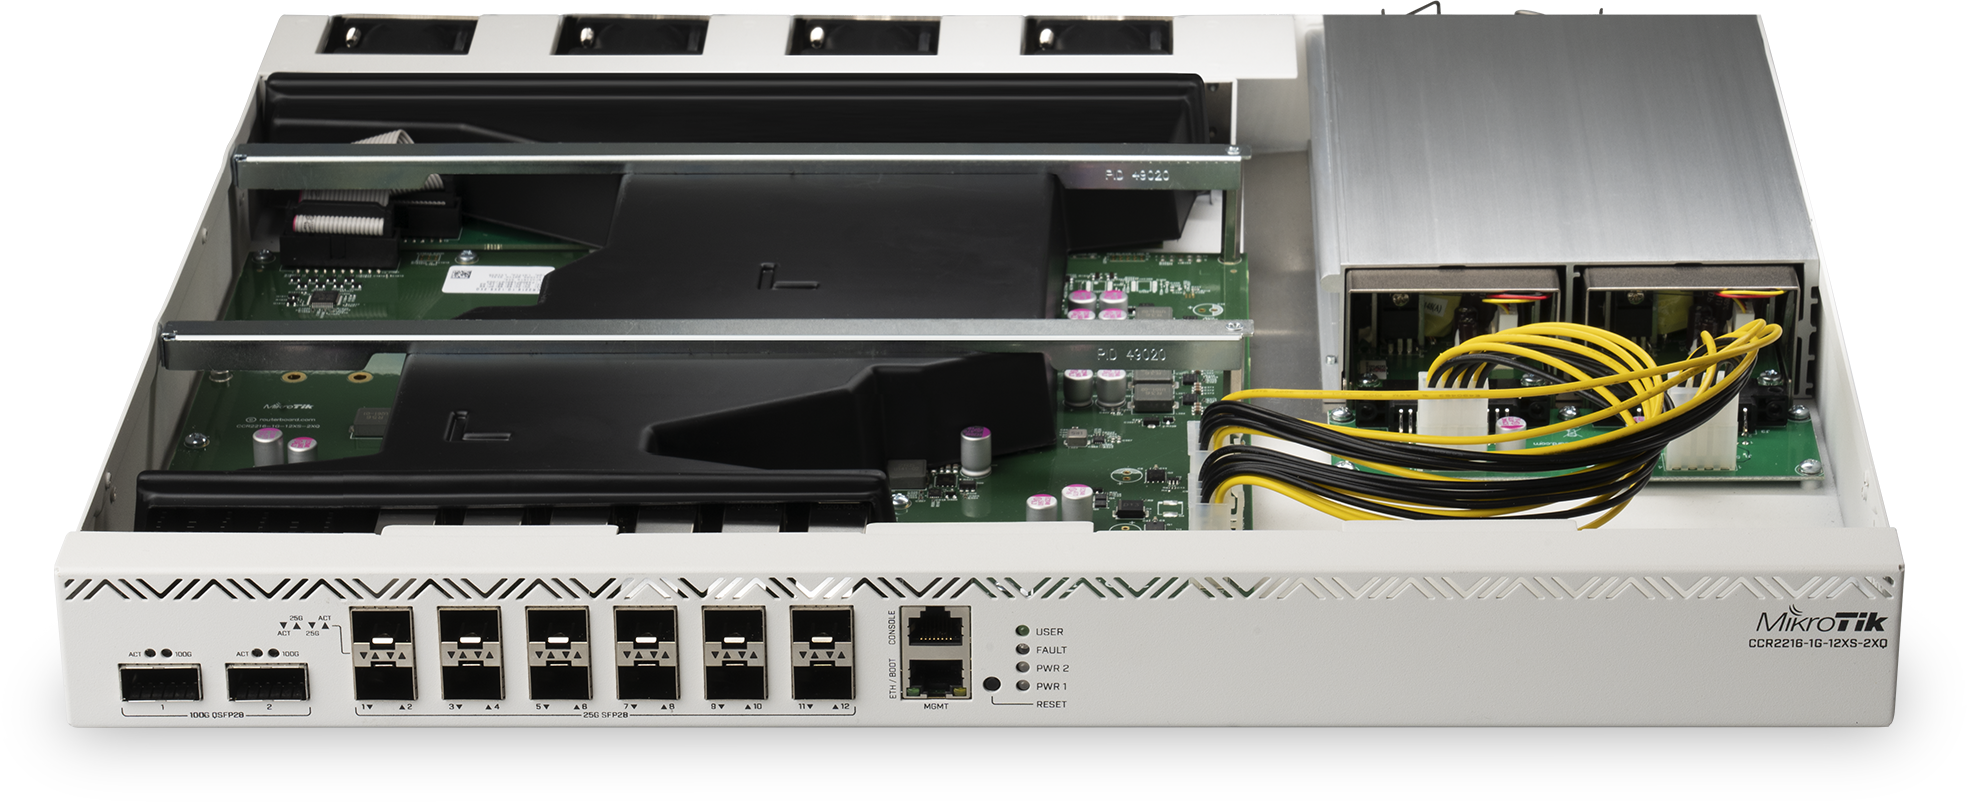 MikroTik Routers and Wireless - Products: CCR2216-1G-12XS-2XQ